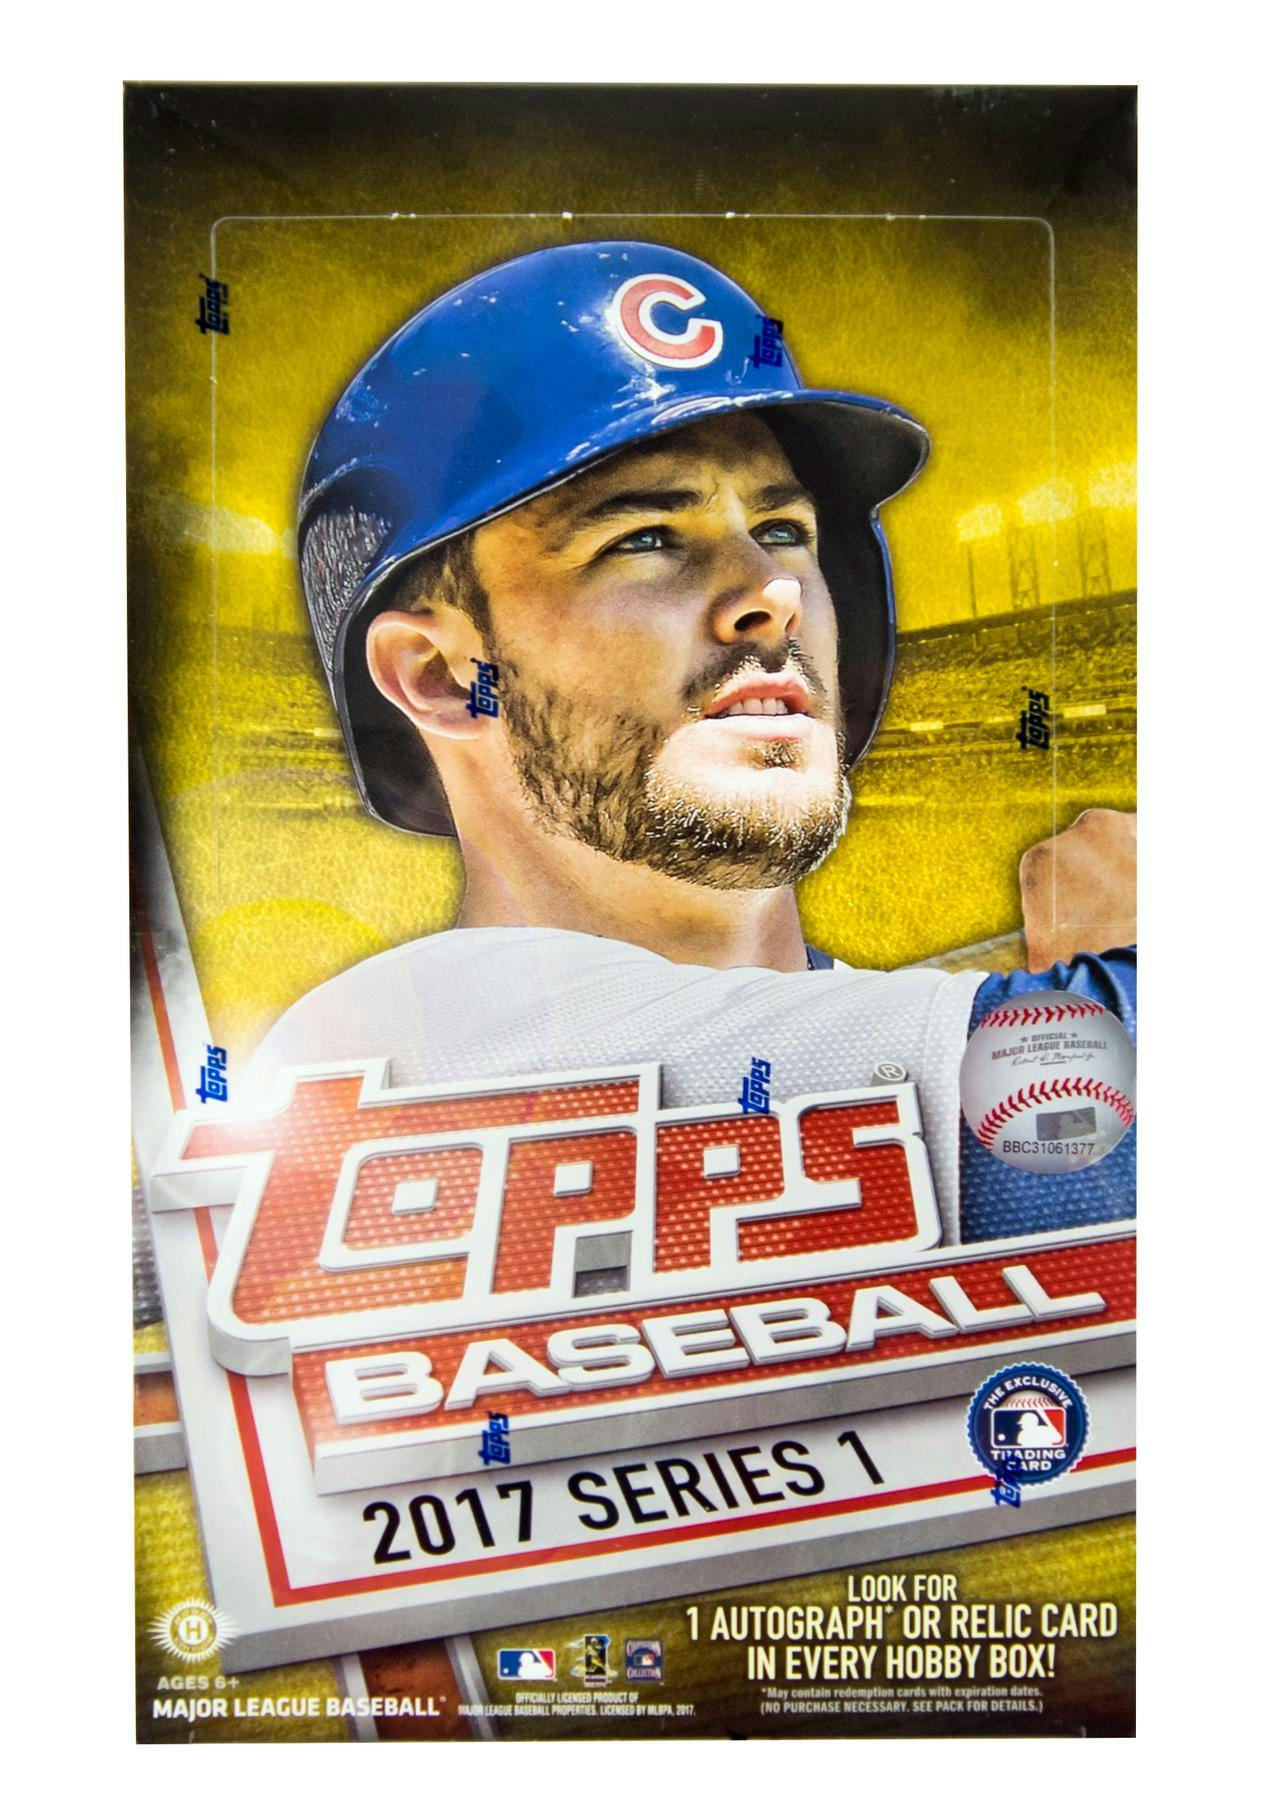 St Louis Cardinals/Complete 2021 Topps Baseball Team Set (Series 1 and 2)  with (21) Cards. ****PLUS (10) Bonus Cardinals Cards 2020/2019****